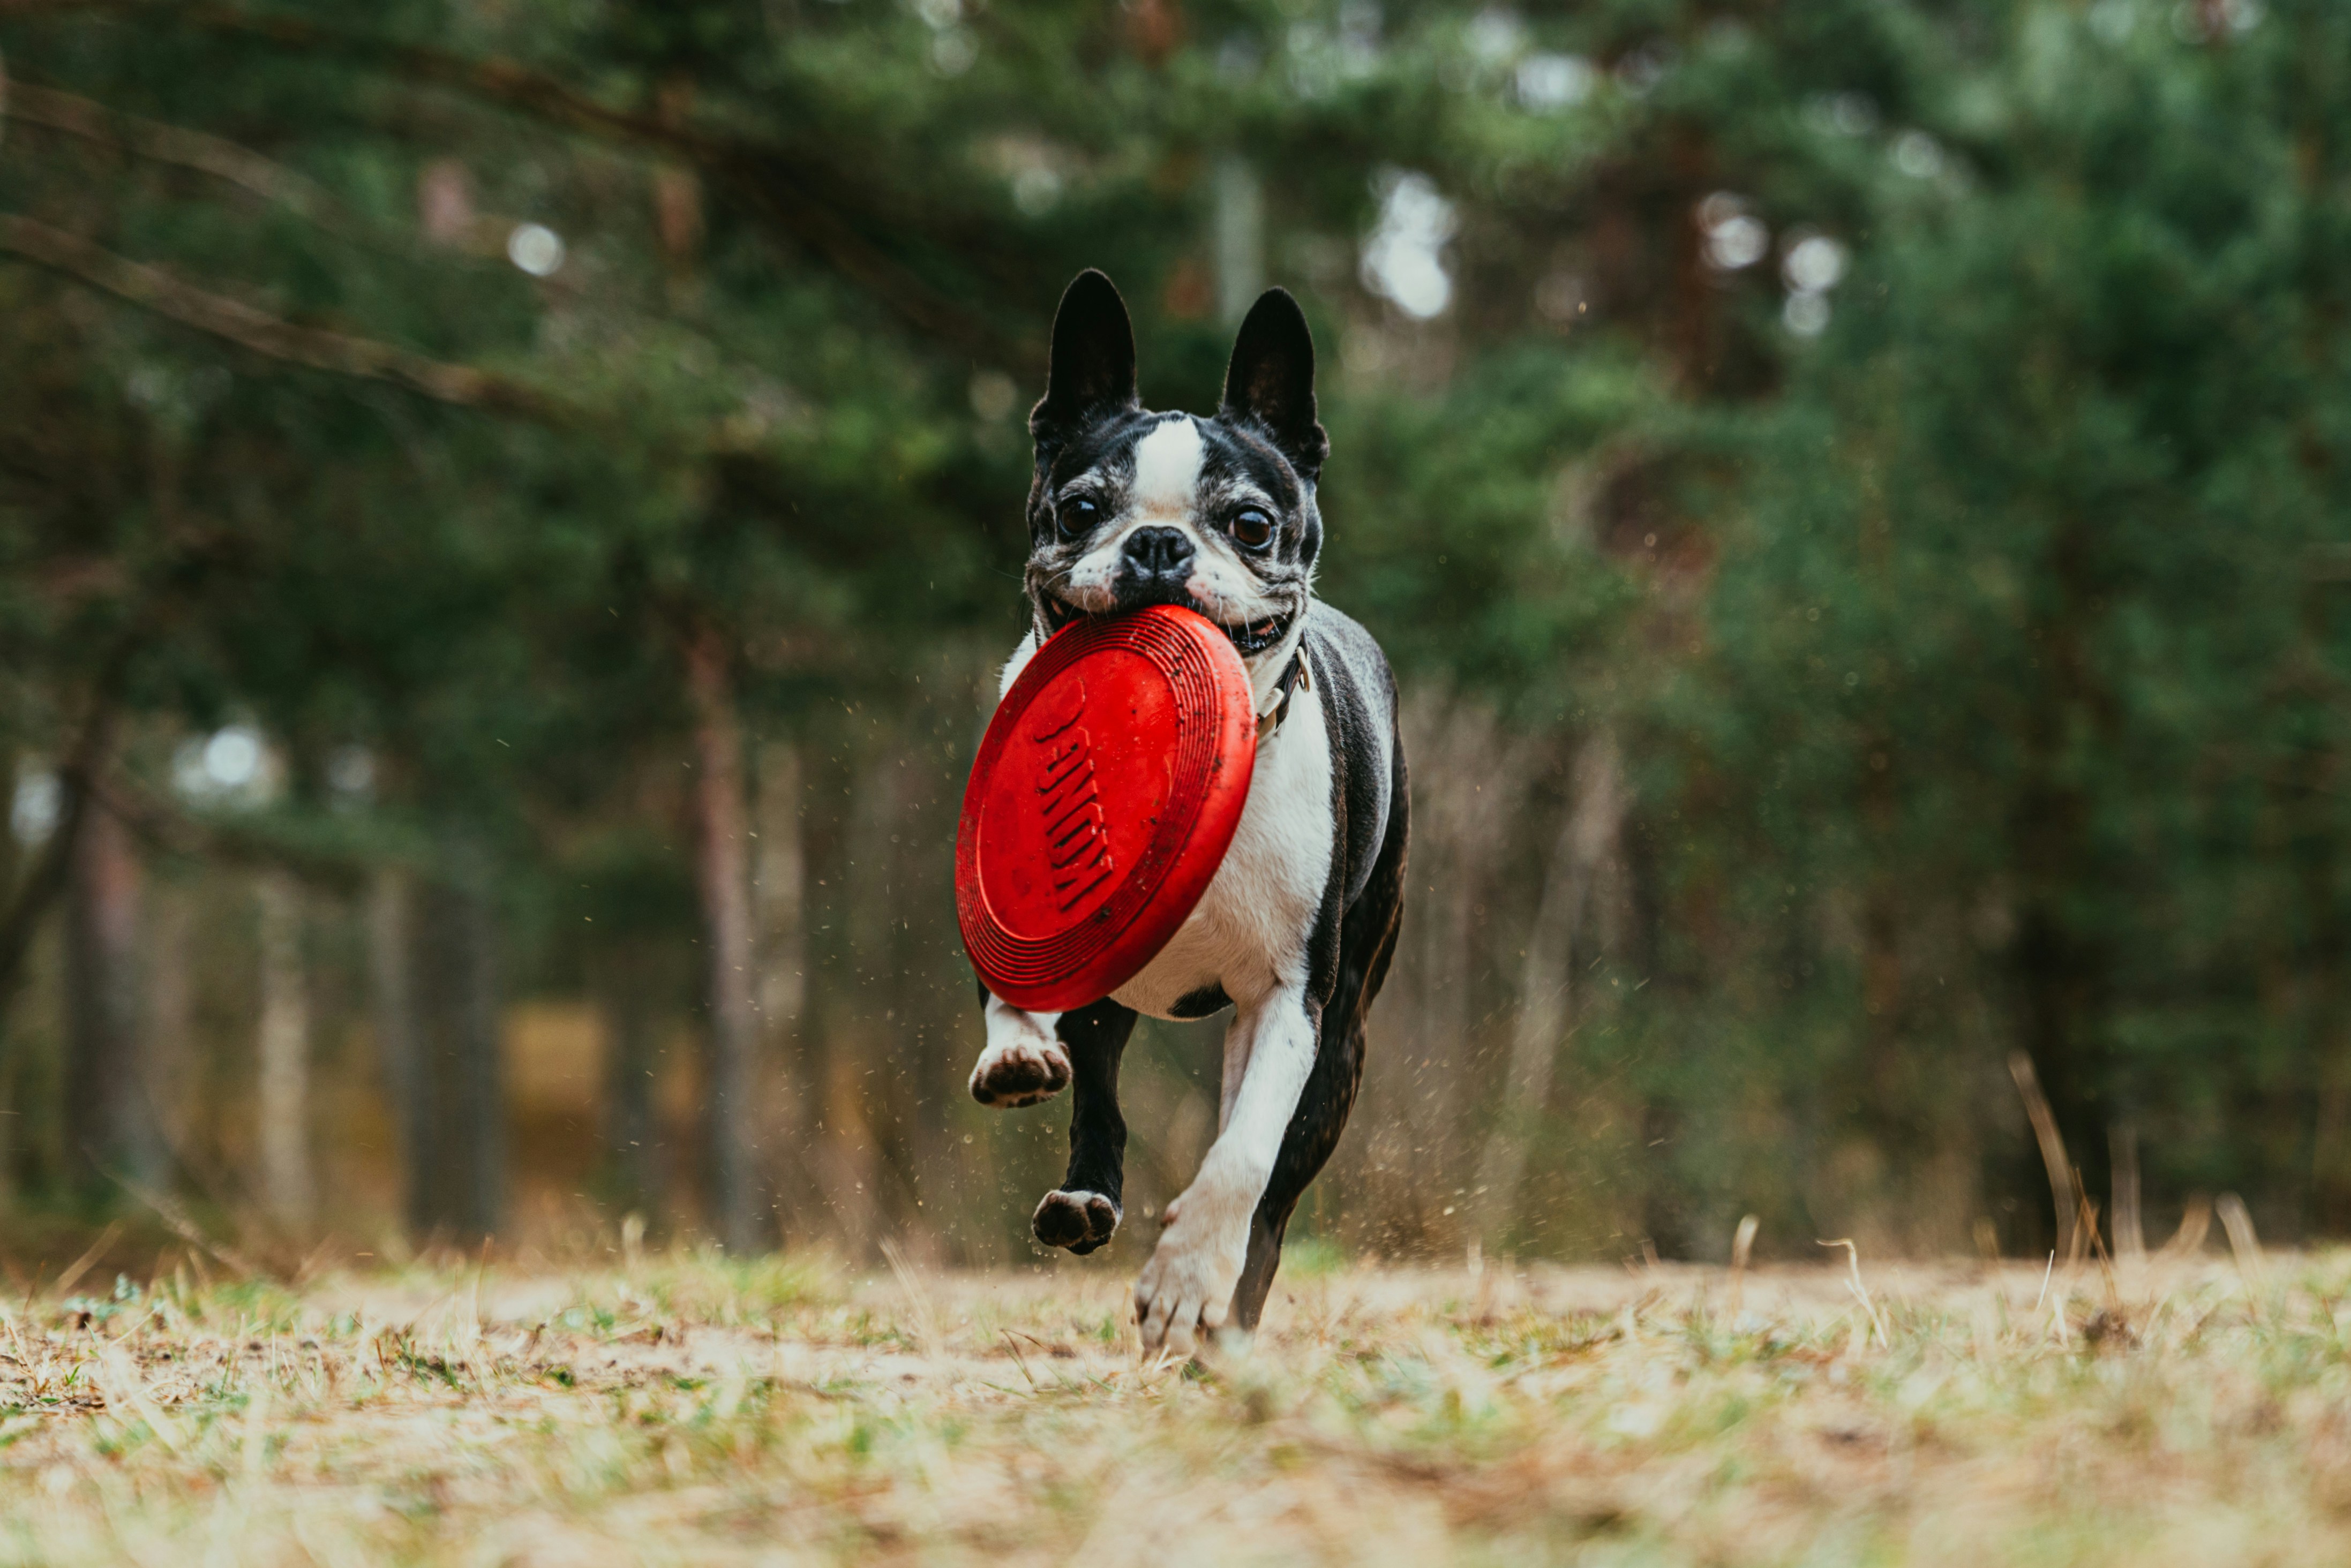 What Indoor Games Can I Play to Keep my Boston Terrier Busy? •